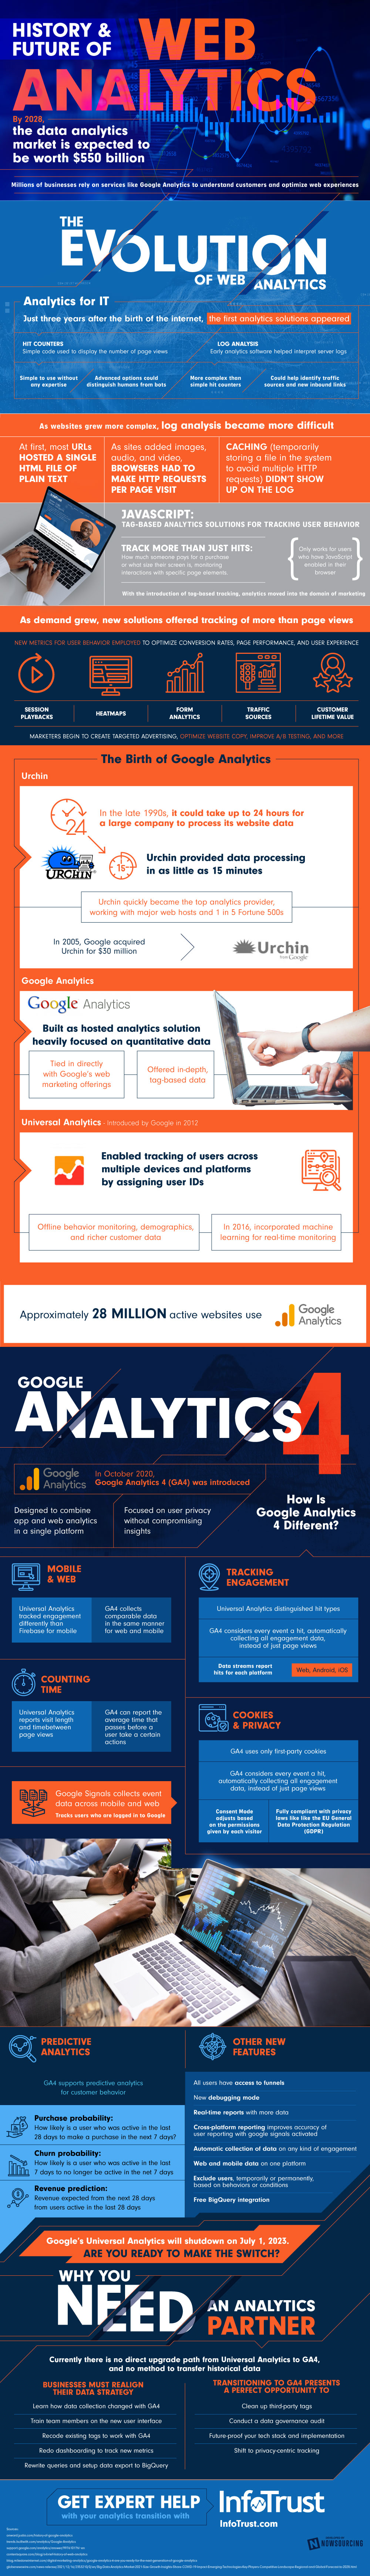 The History and Future of Web Analytics Infographic